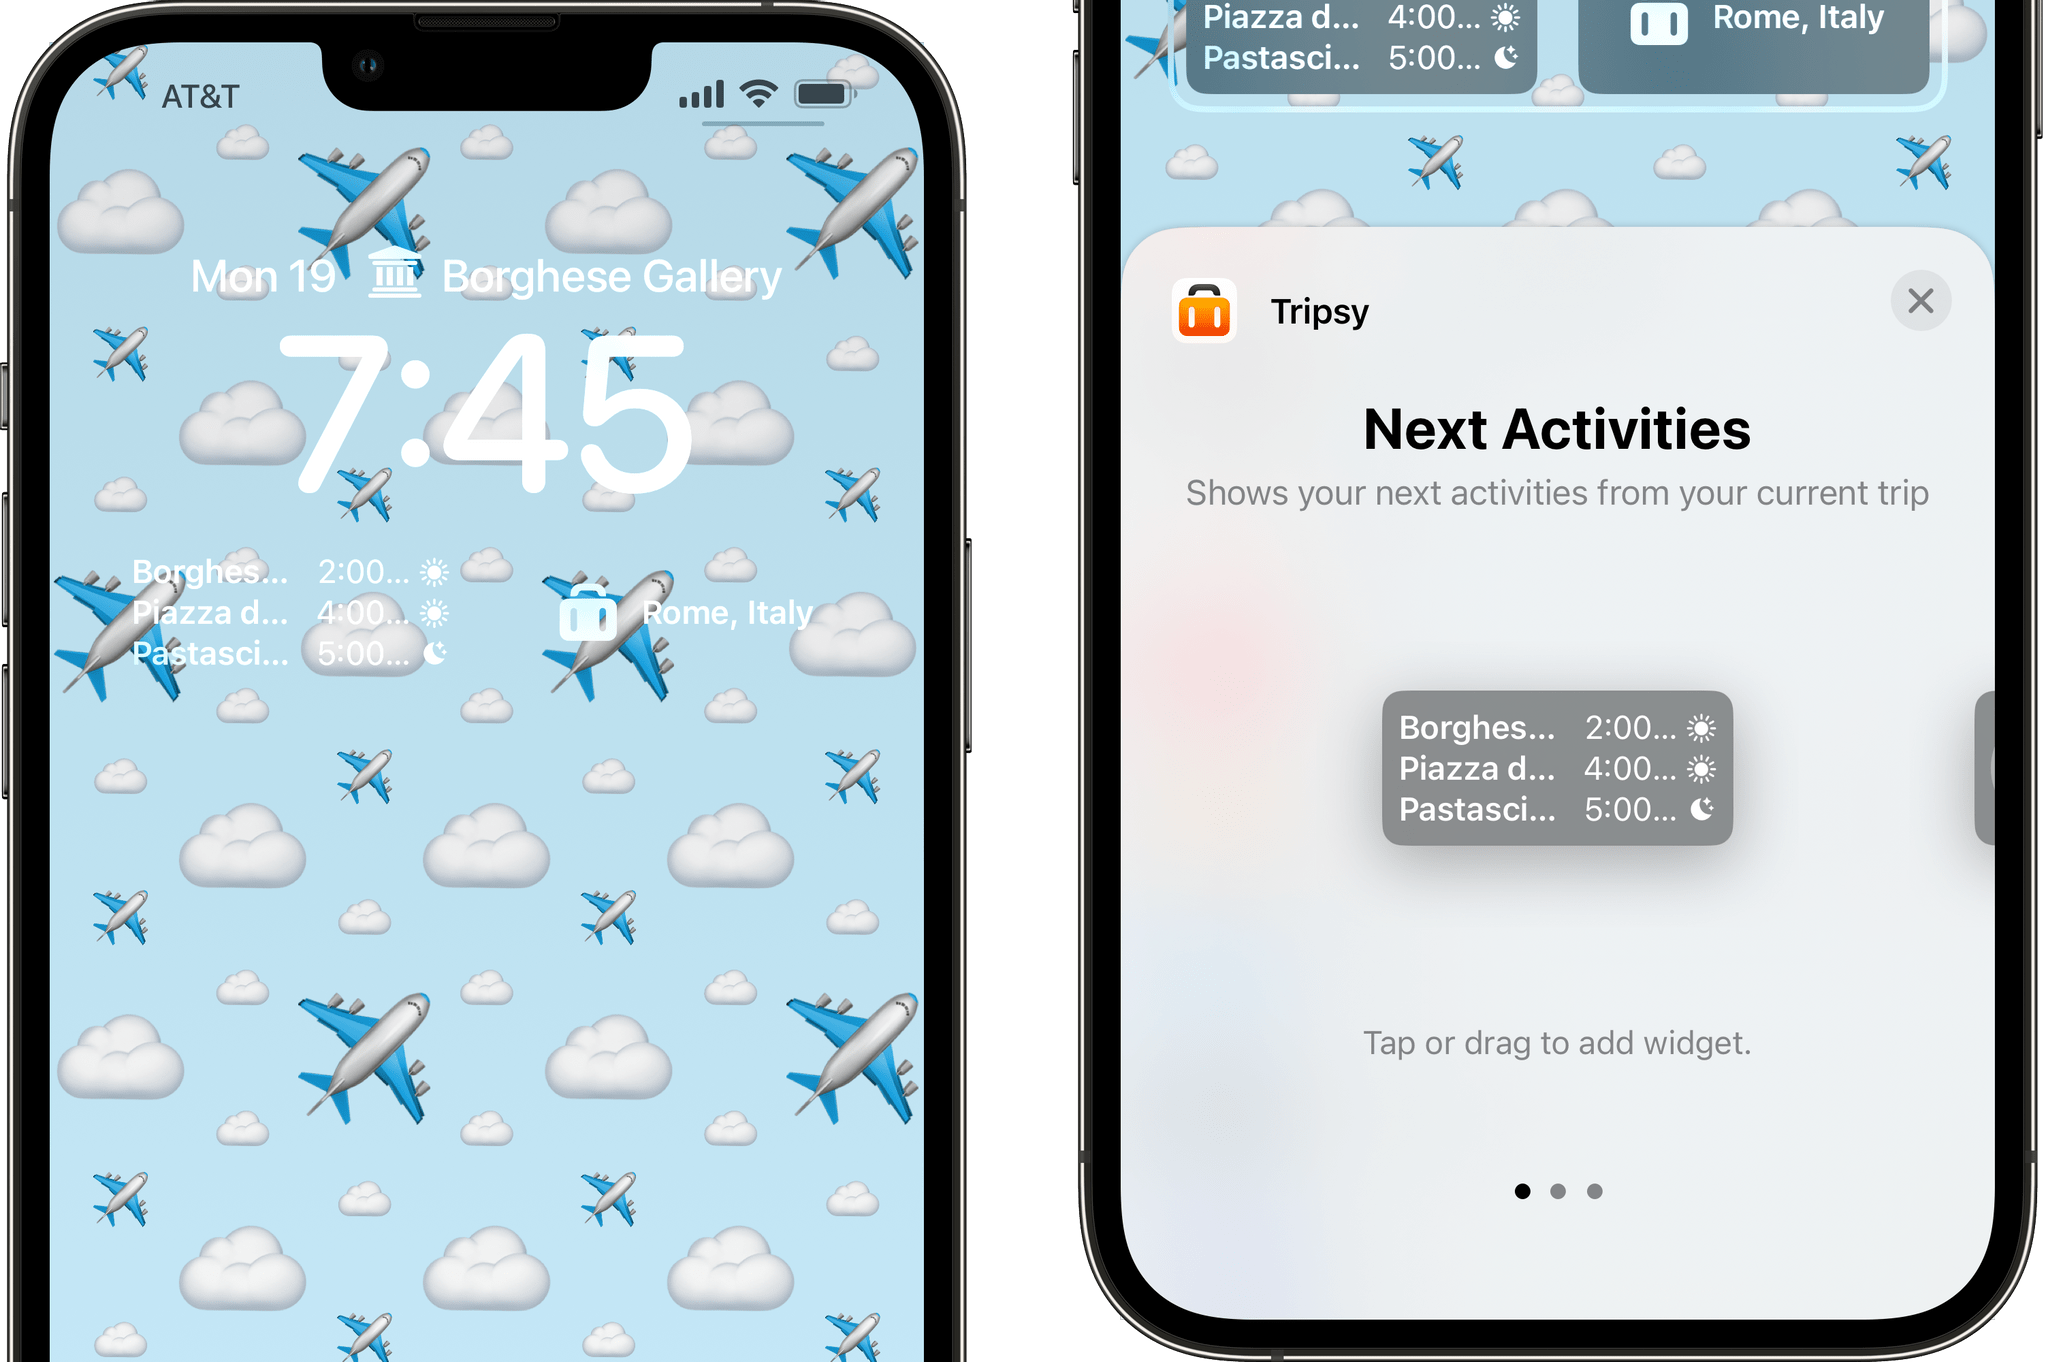 Tracking activities and flights with Tripsy.